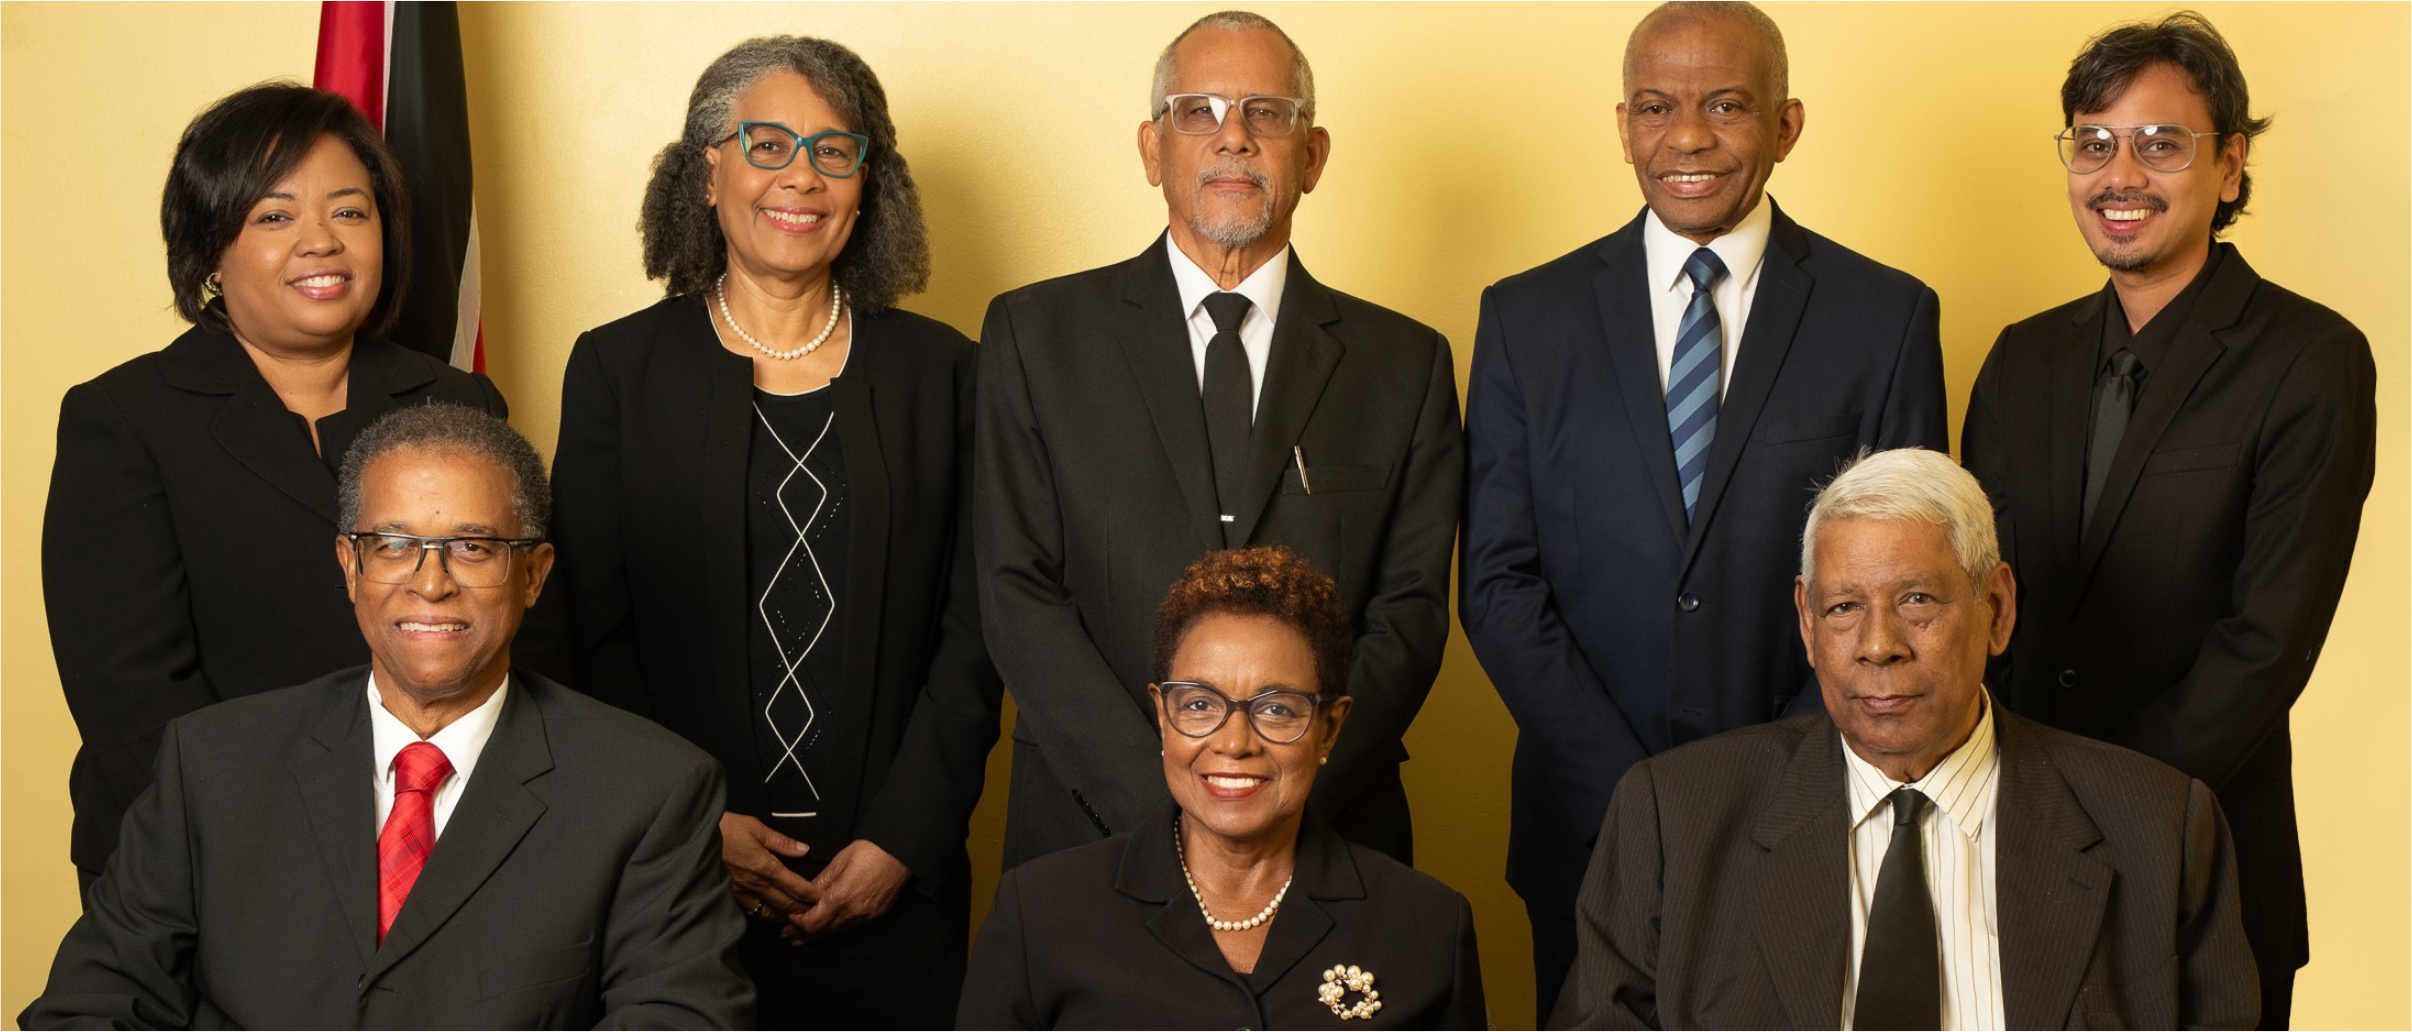 (Seated from left) His Honour Mr. Herbert Soverall, Vice President; Her Honour Mrs. Heather Seale, President and His Honour Mr. Lawrence Achong, Chairman of the Essential Services Division  (Standing from left) Her Honour Mrs. Caron London, Her Honour Ms. Stephanie Fingal, His Honour Mr. Mario Als, His Honour Mr. Glenn Wilson and His Honour Mr. Peter Ramkissoon